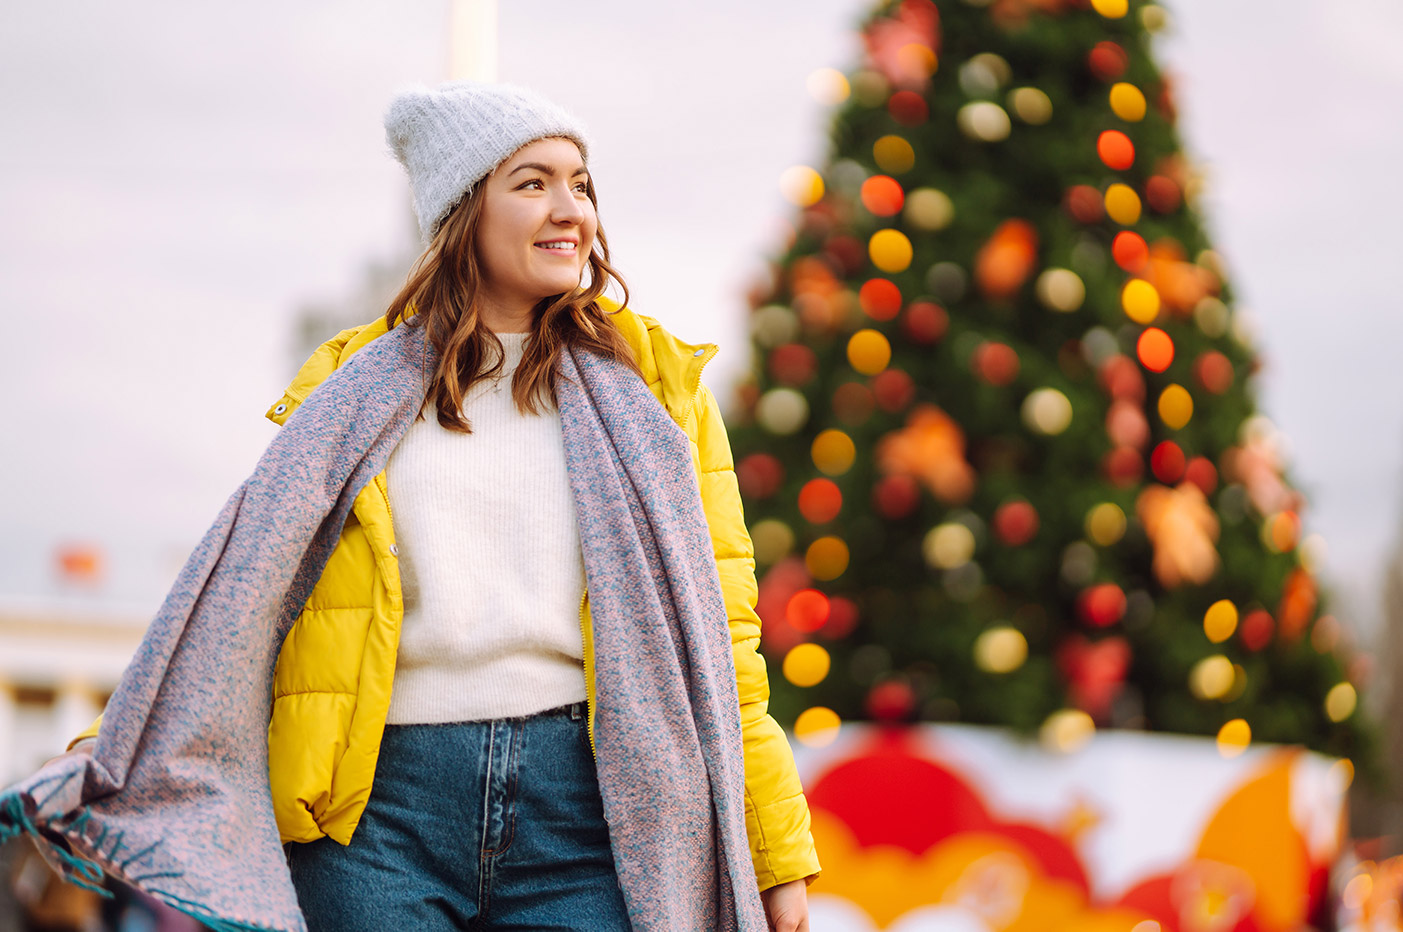 Tips To Take Care of Your Health During the Holidays